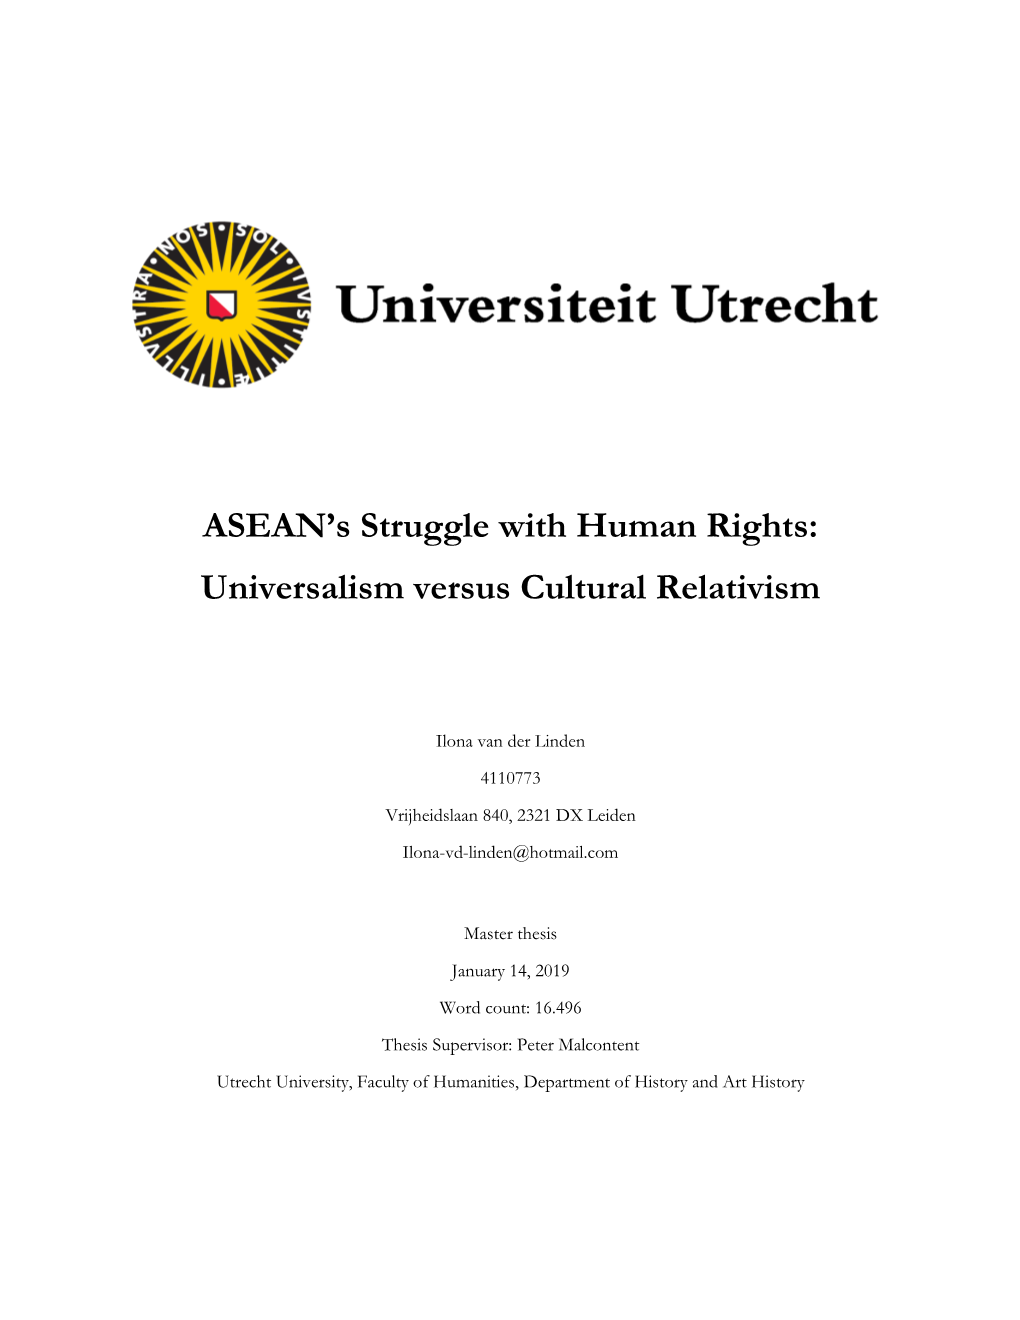 ASEAN's Struggle with Human Rights: Universalism Versus Cultural Relativism